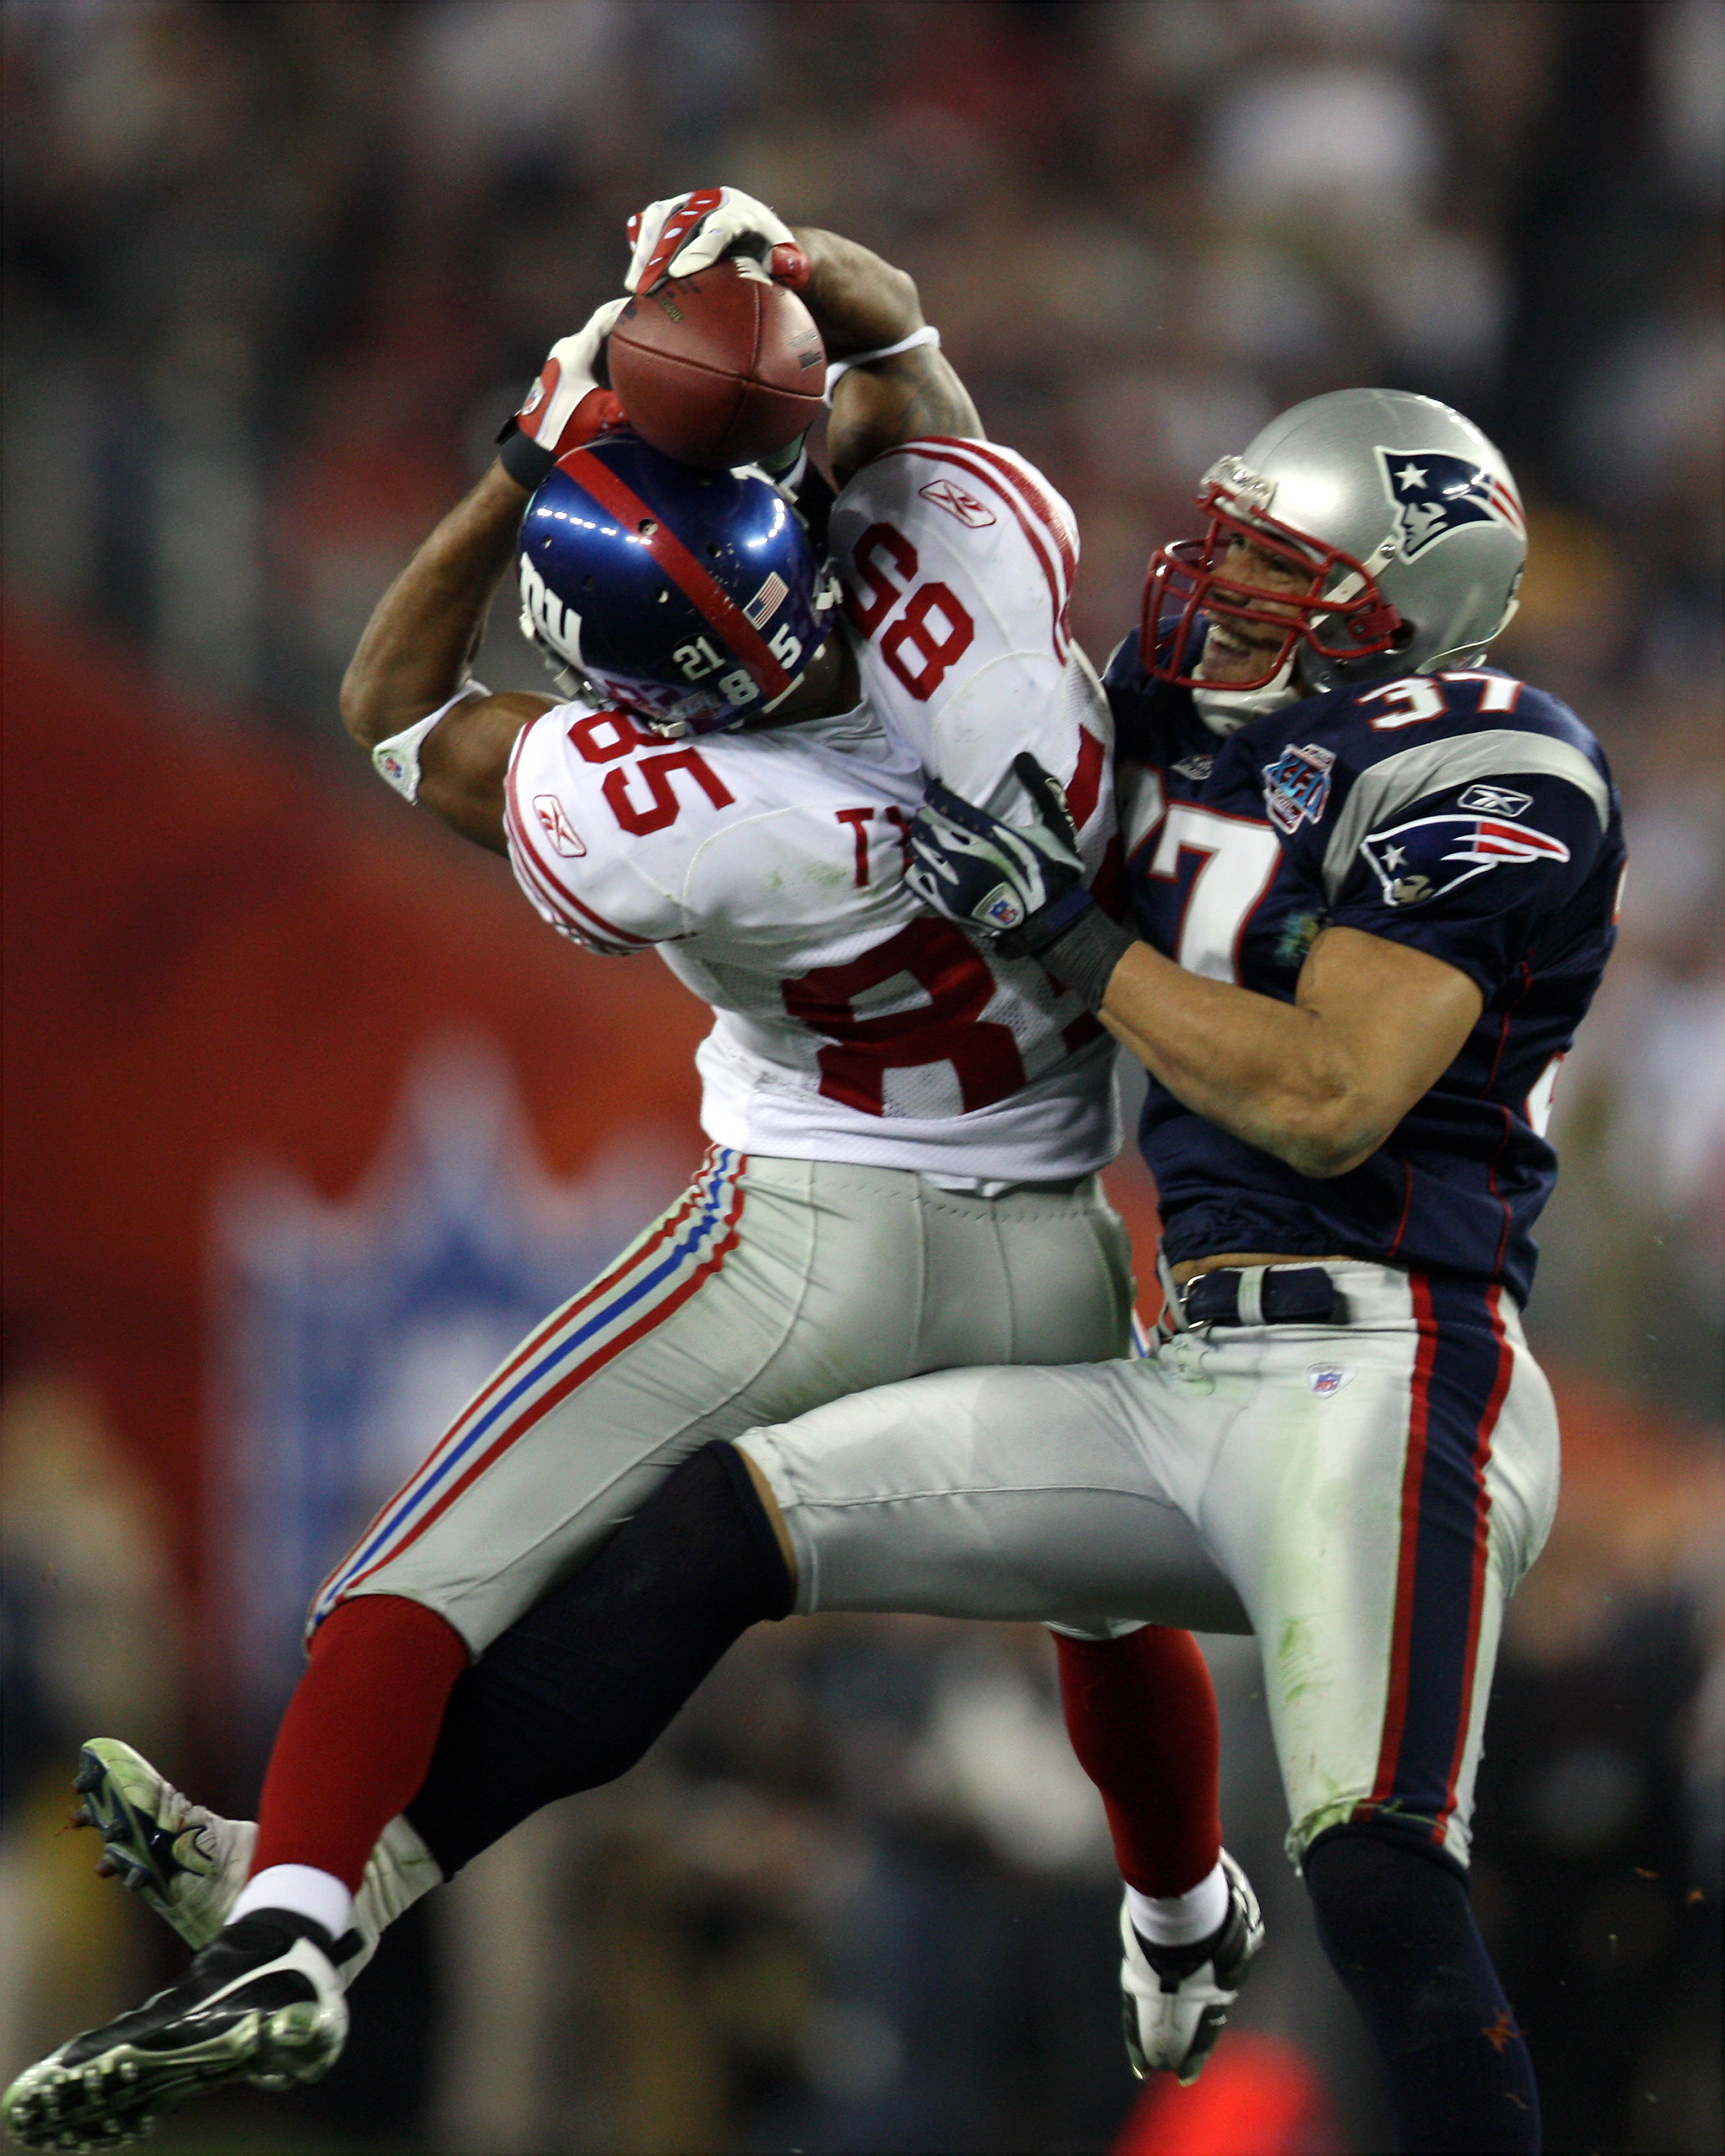 player catching the ball mid-air while a patriot goes in for a tackle